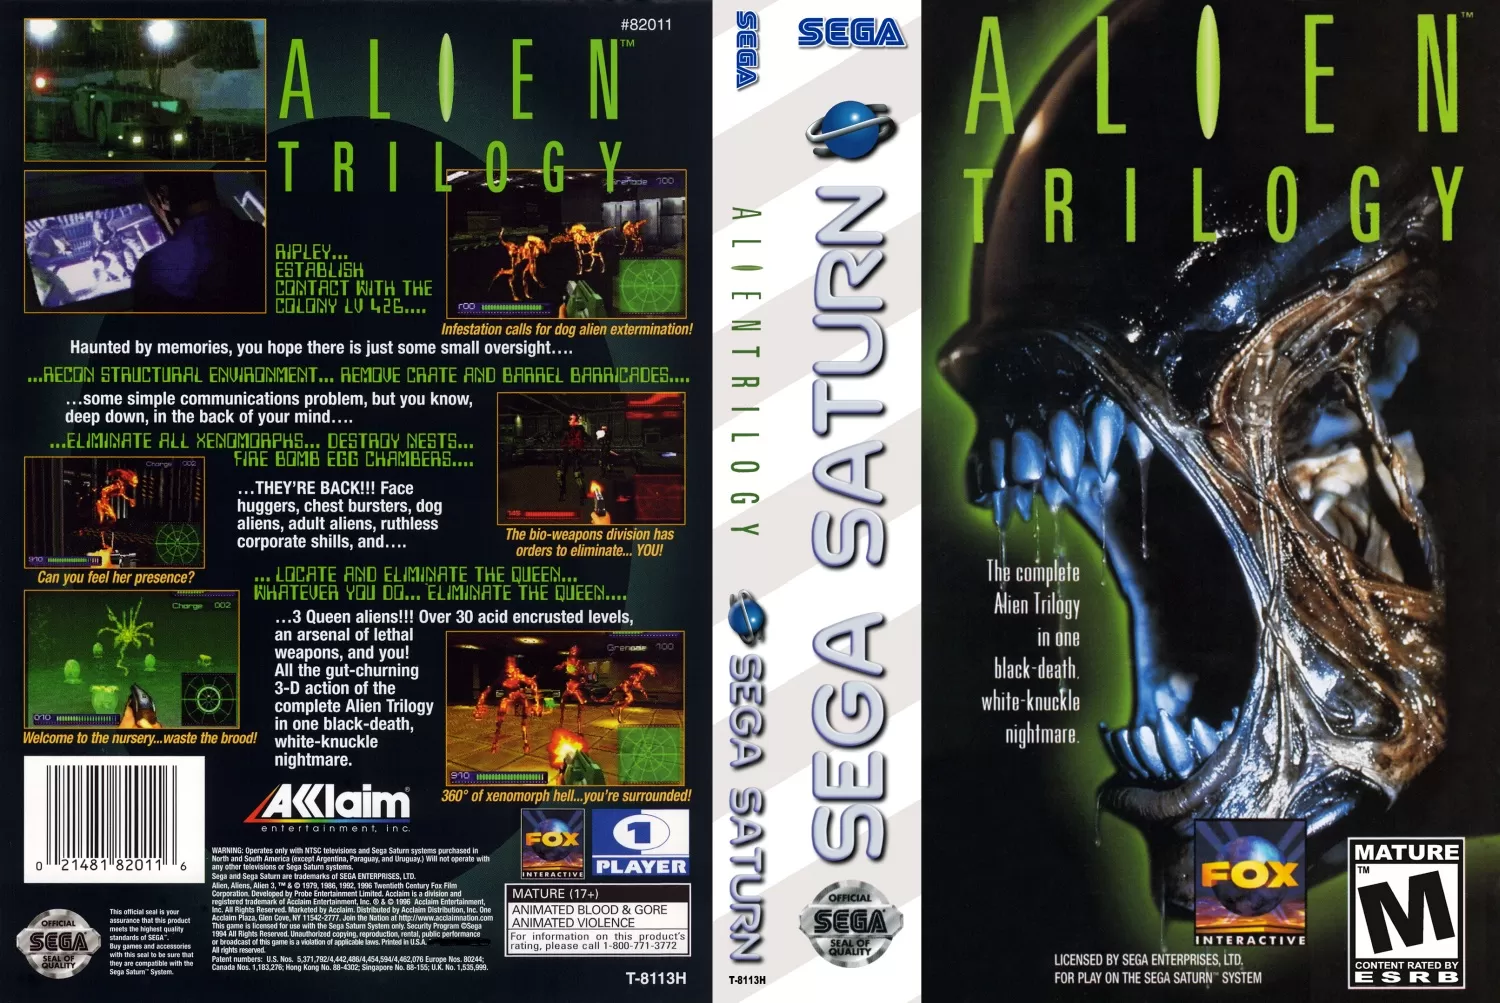 Alien Trilogy (1996 Aliens Game for PC, PS1 & Saturn) - AvPGalaxy